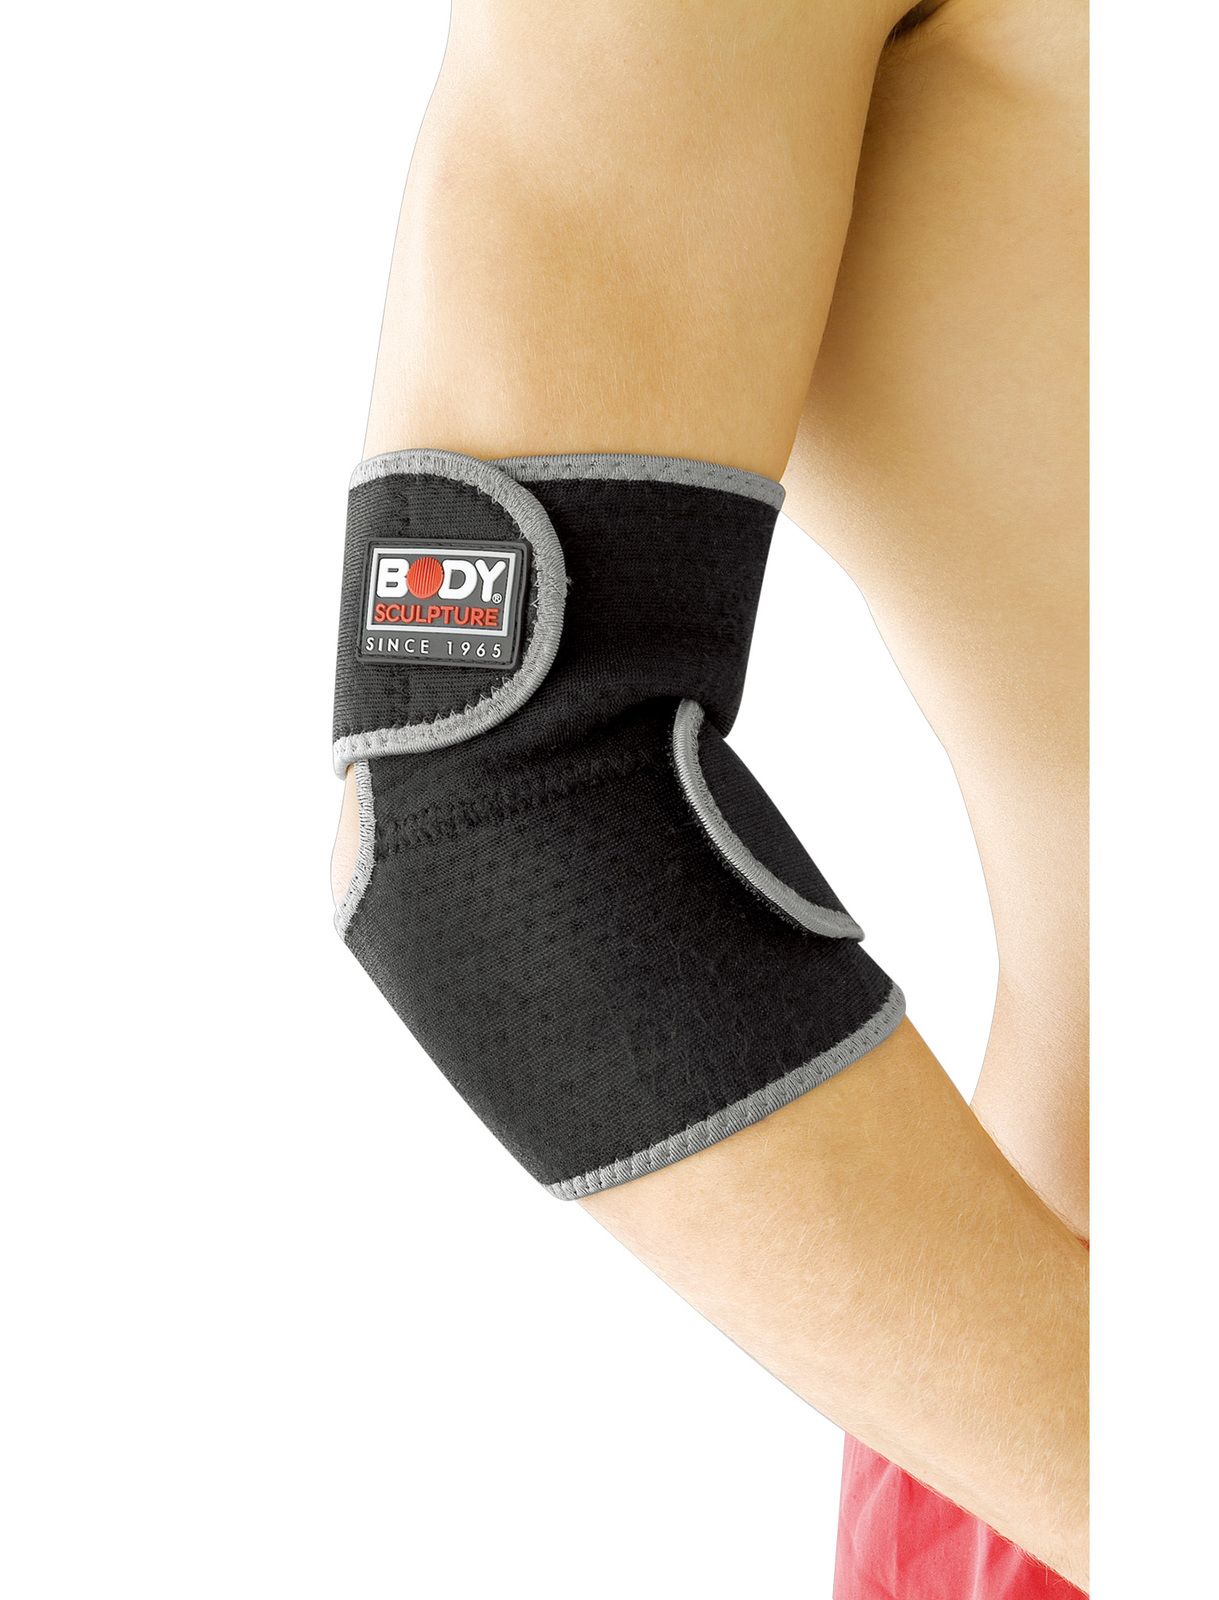 Body Sculpture Elbow Support with Terry Cotton